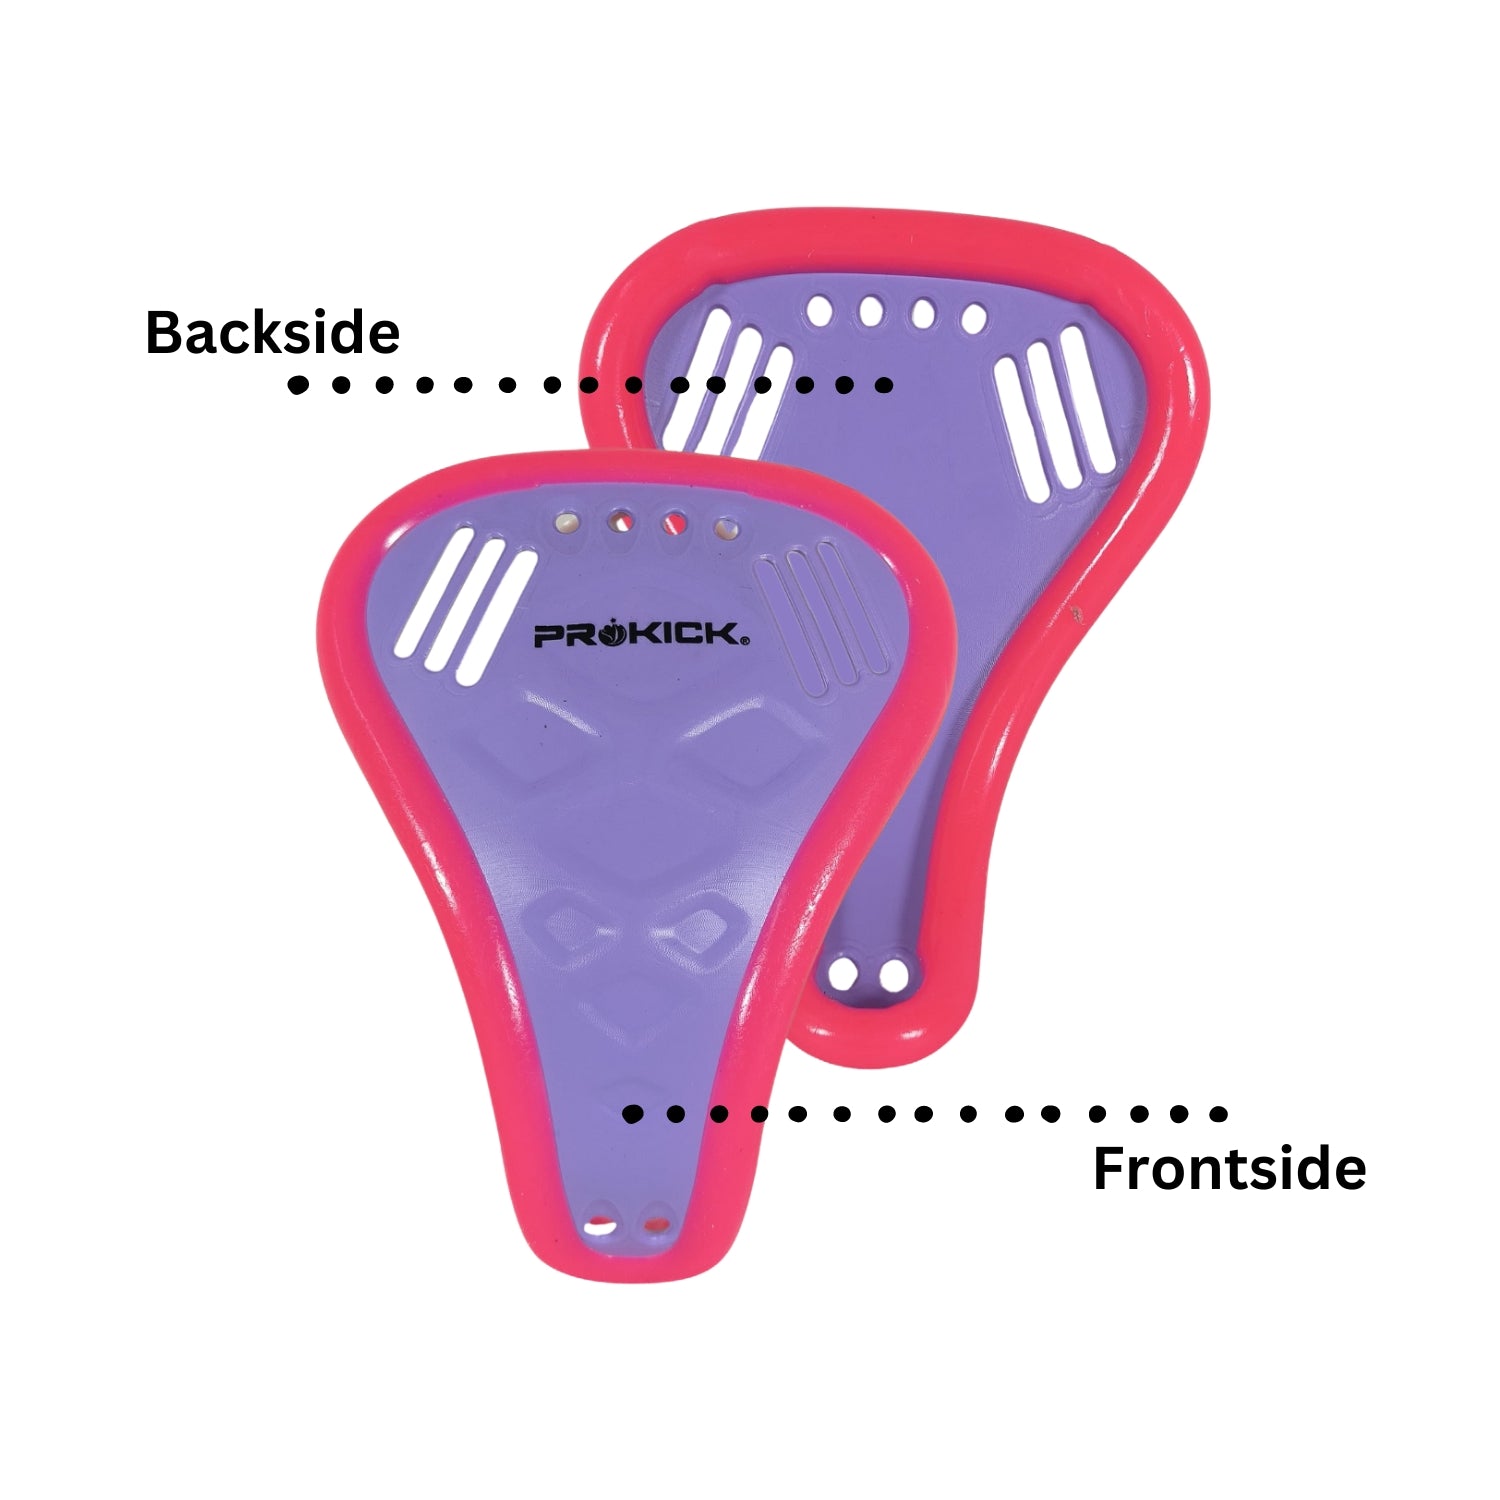 Prokick Female Abdominal Guard With Extra Soft Rubber Edges (Assorted Color) - Best Price online Prokicksports.com